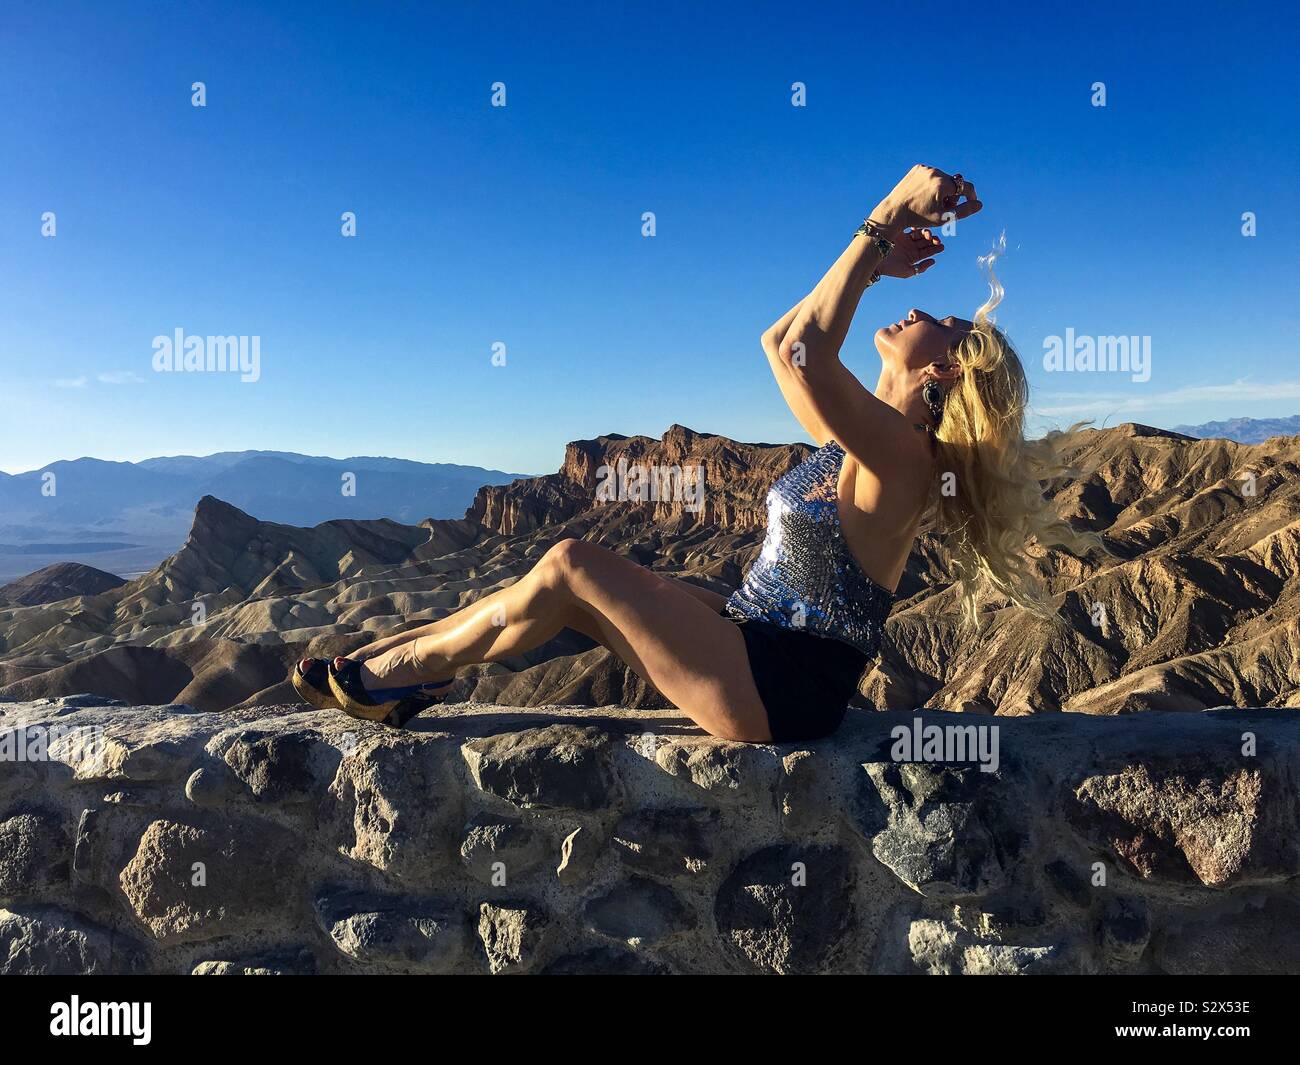 Blonde model in silver tank top and black shorts sitting on a ledge overlooking Zabriskie Point in Death Valley, a strand of hair floating upward to the sky. Stock Photo